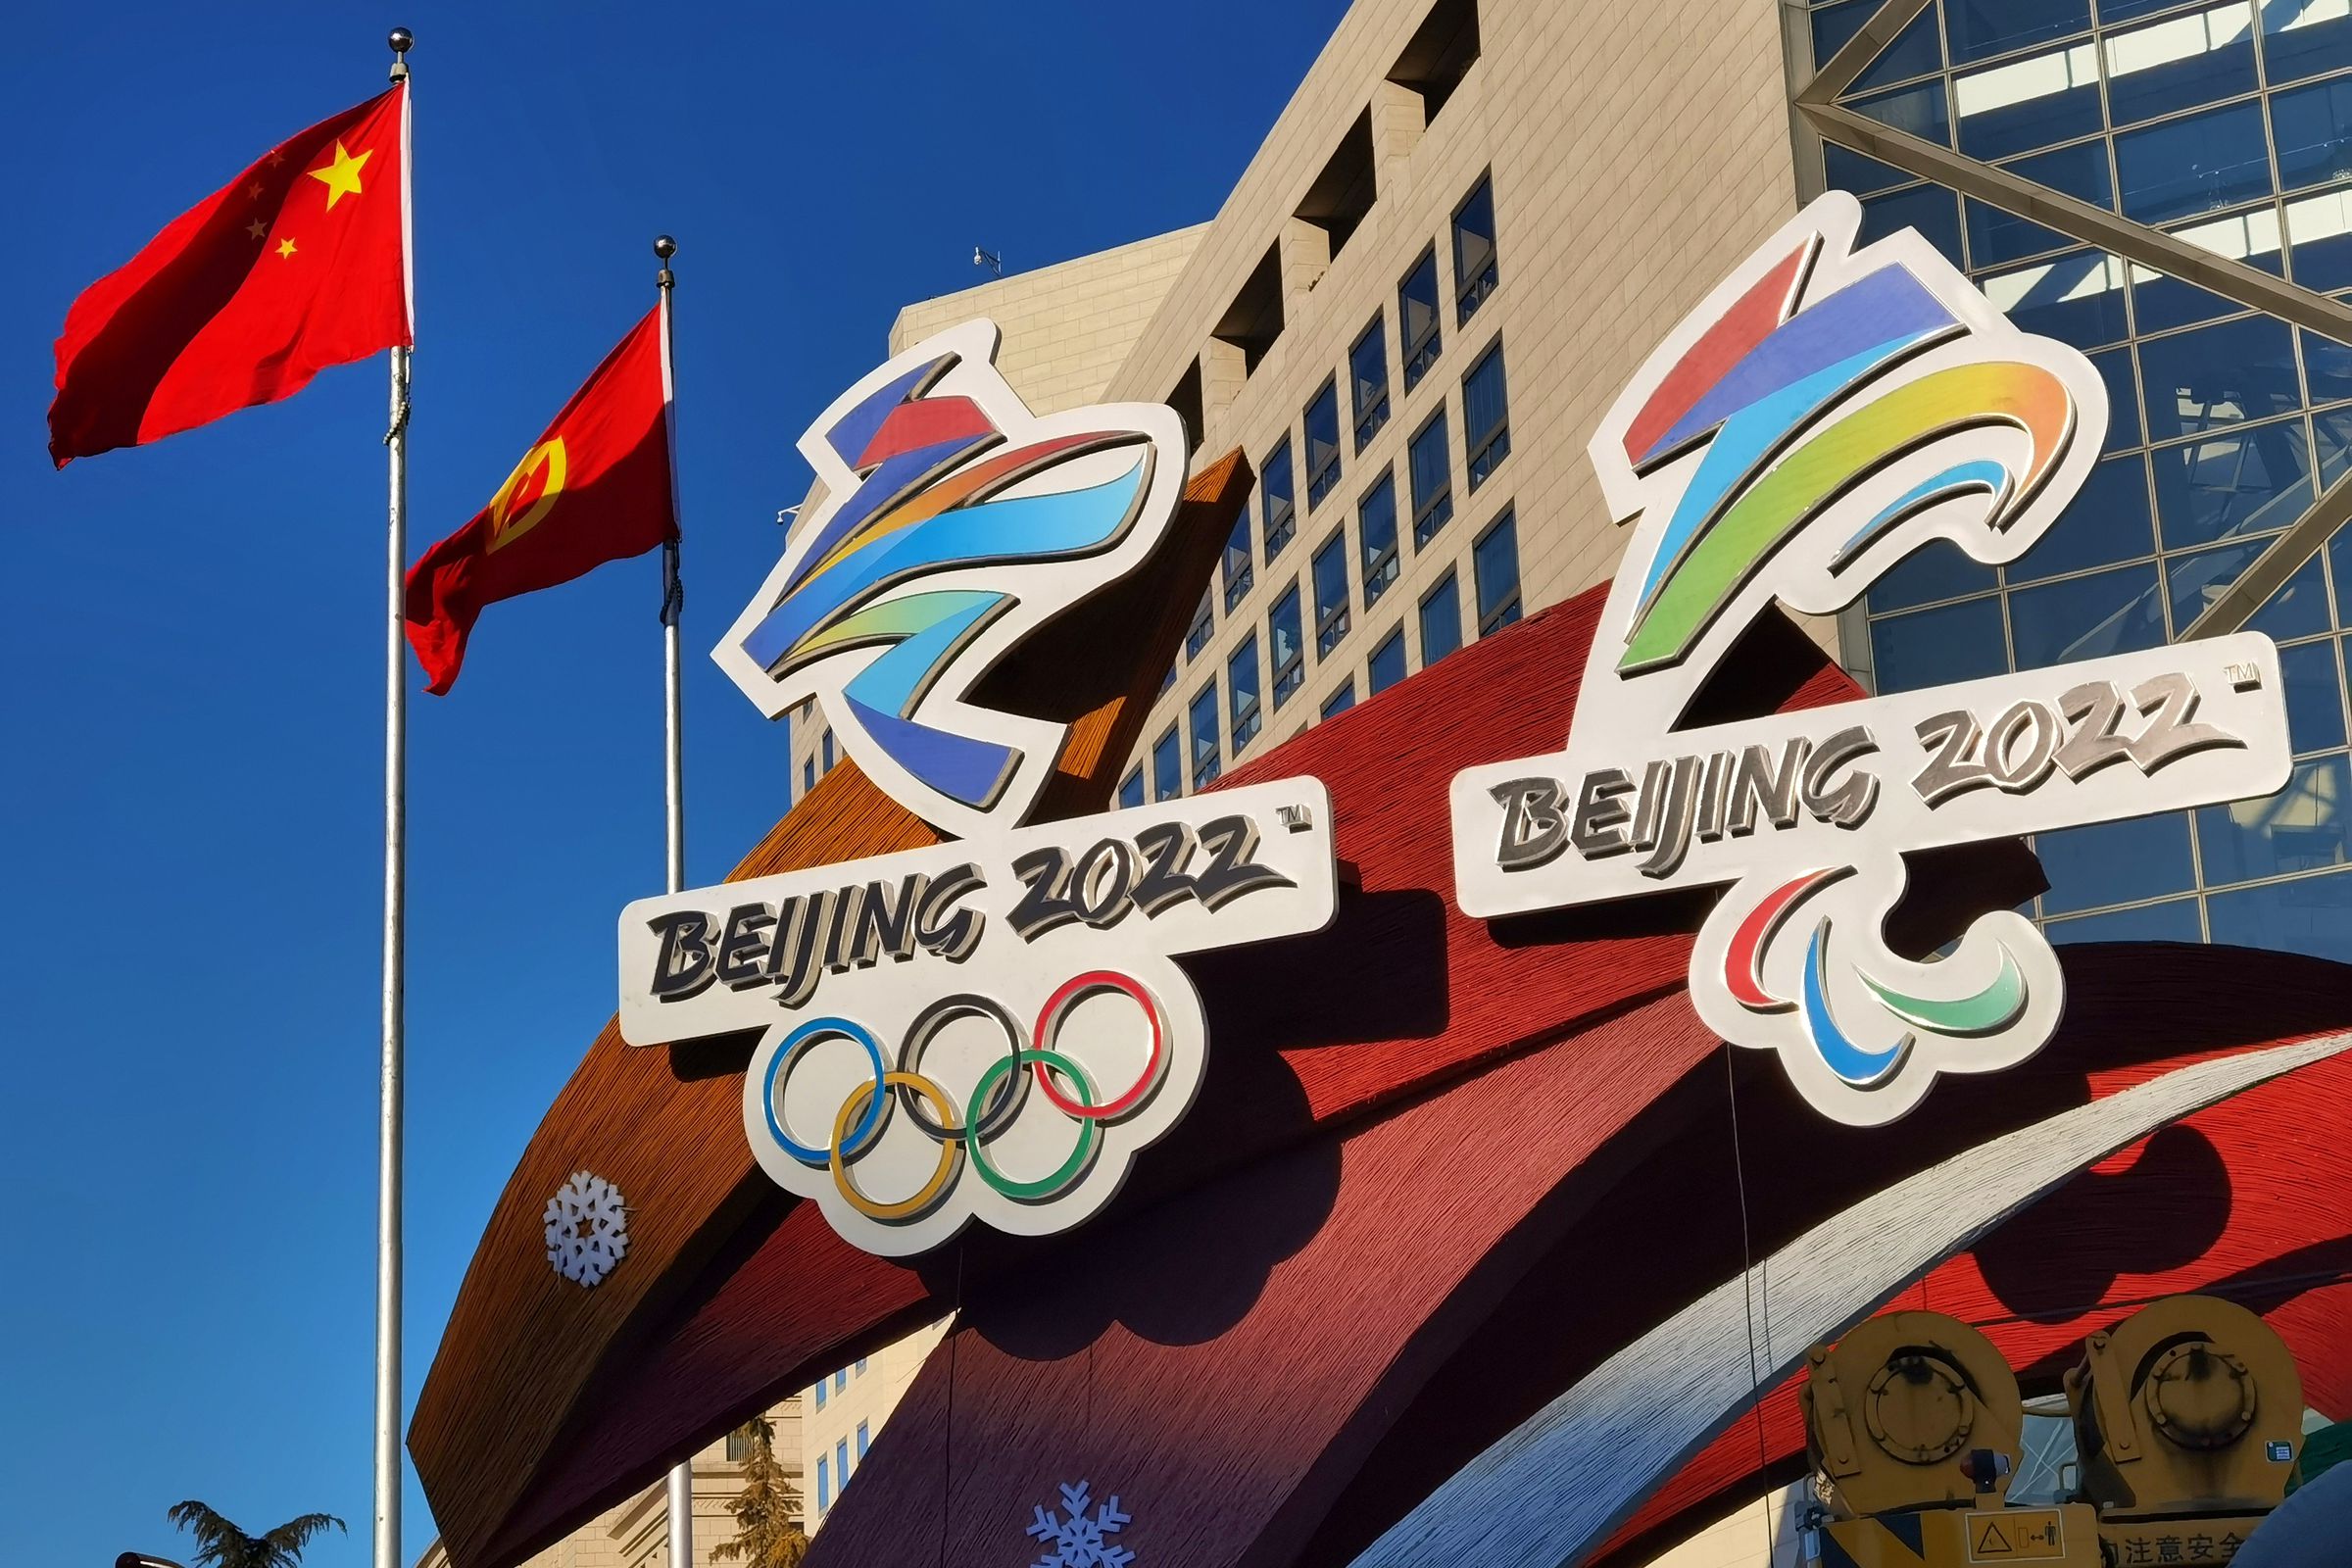 Workers Set Up Winter Olympics-themed Installation In Beijing